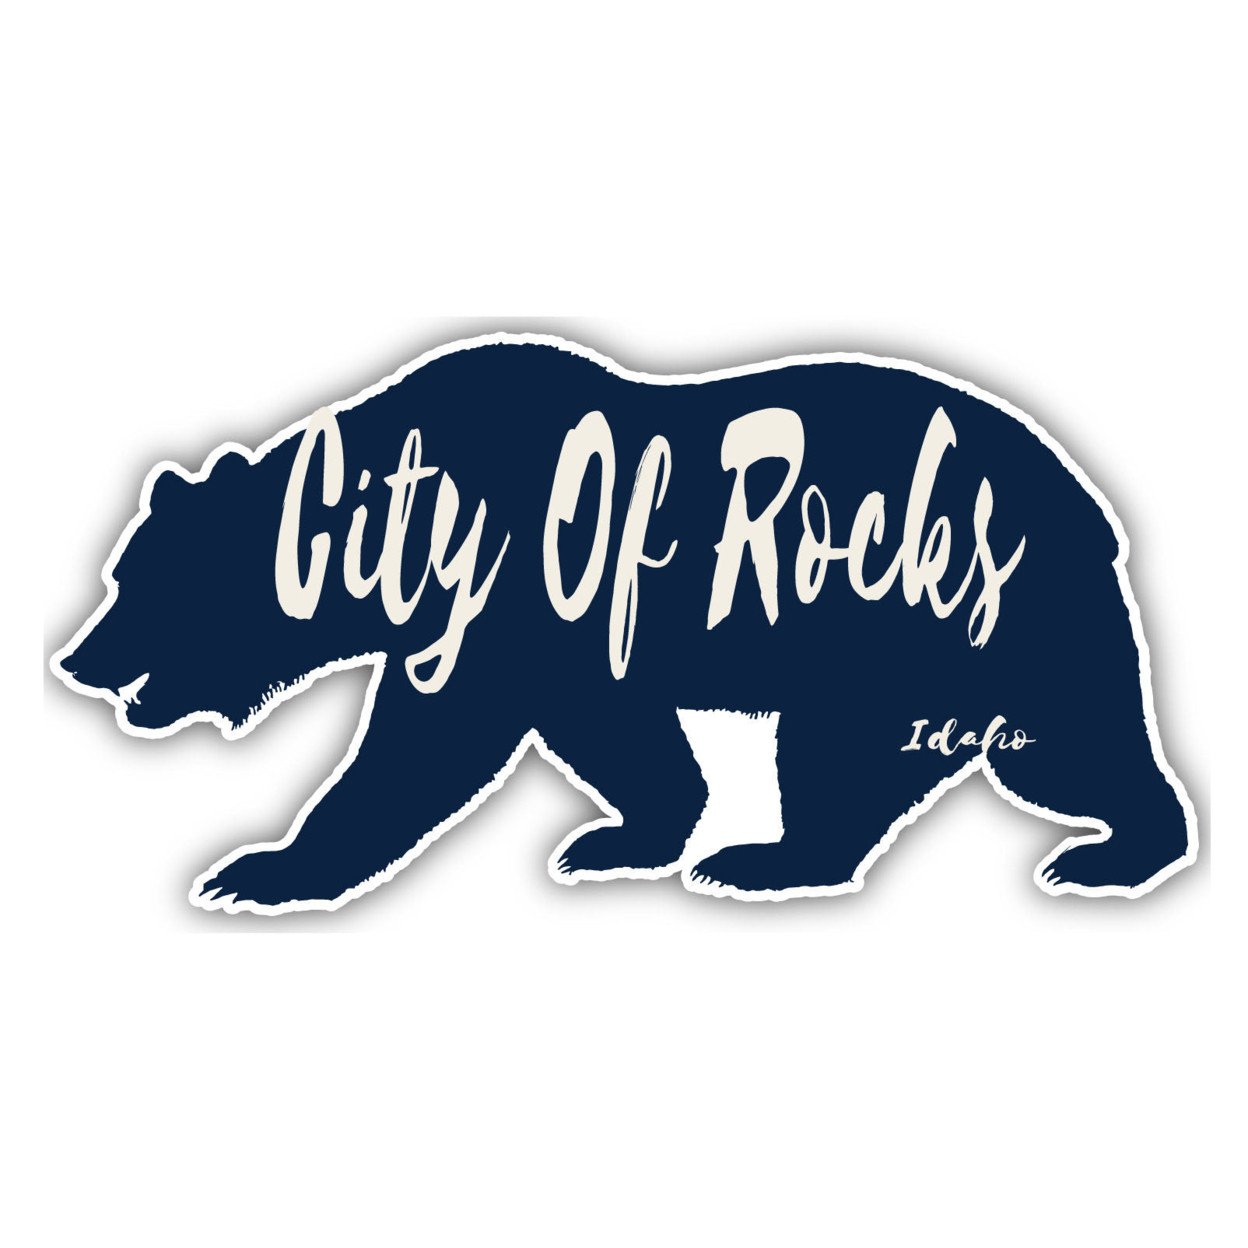 City Of Rocks Idaho Souvenir Decorative Stickers (Choose Theme And Size) - 4-Pack, 8-Inch, Bear